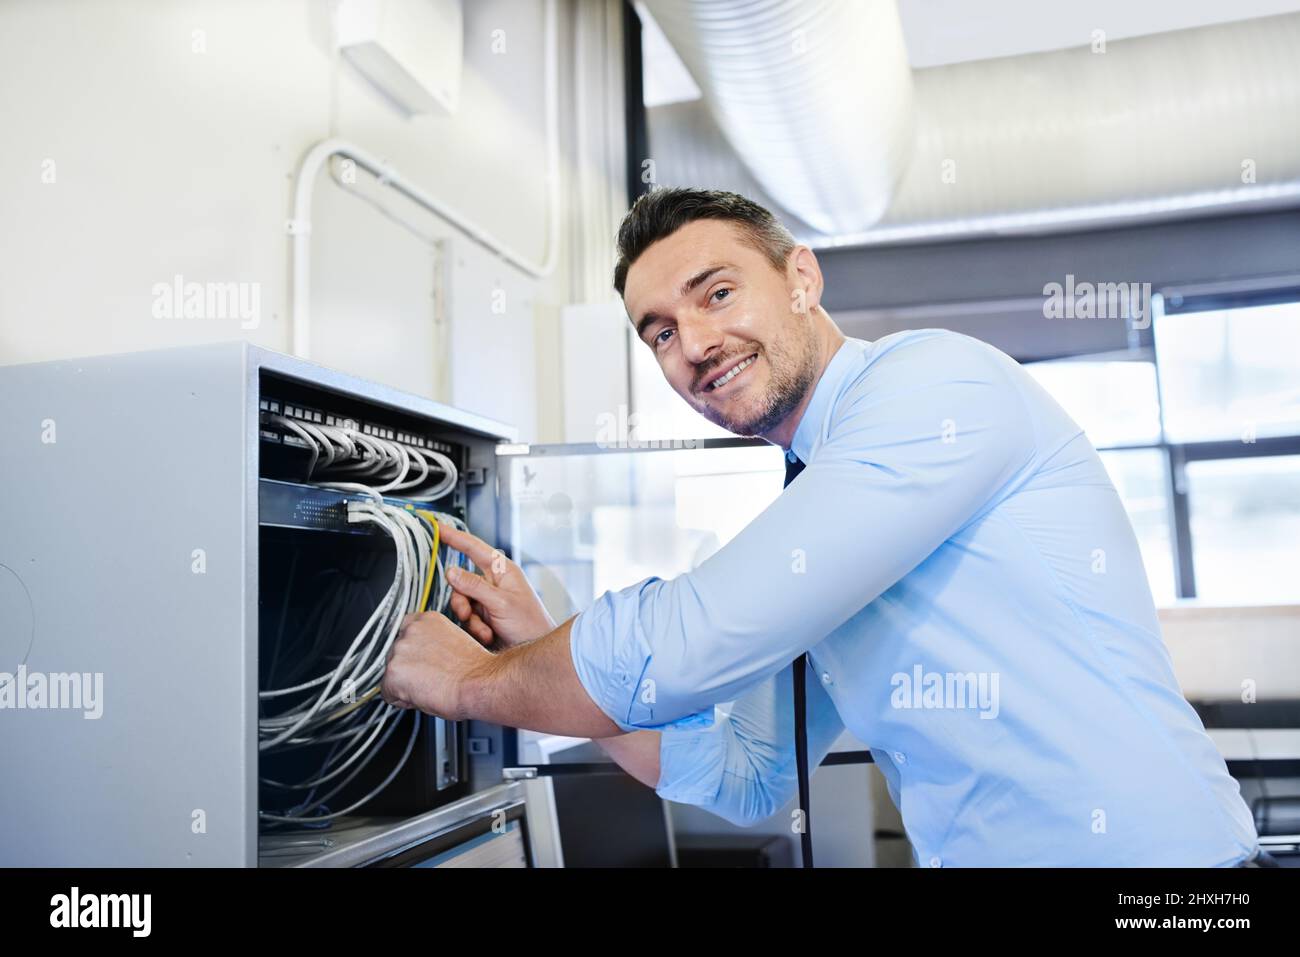 Youll be online in one more minute. Portrait of a smiling computer engineer working on a server. Stock Photo